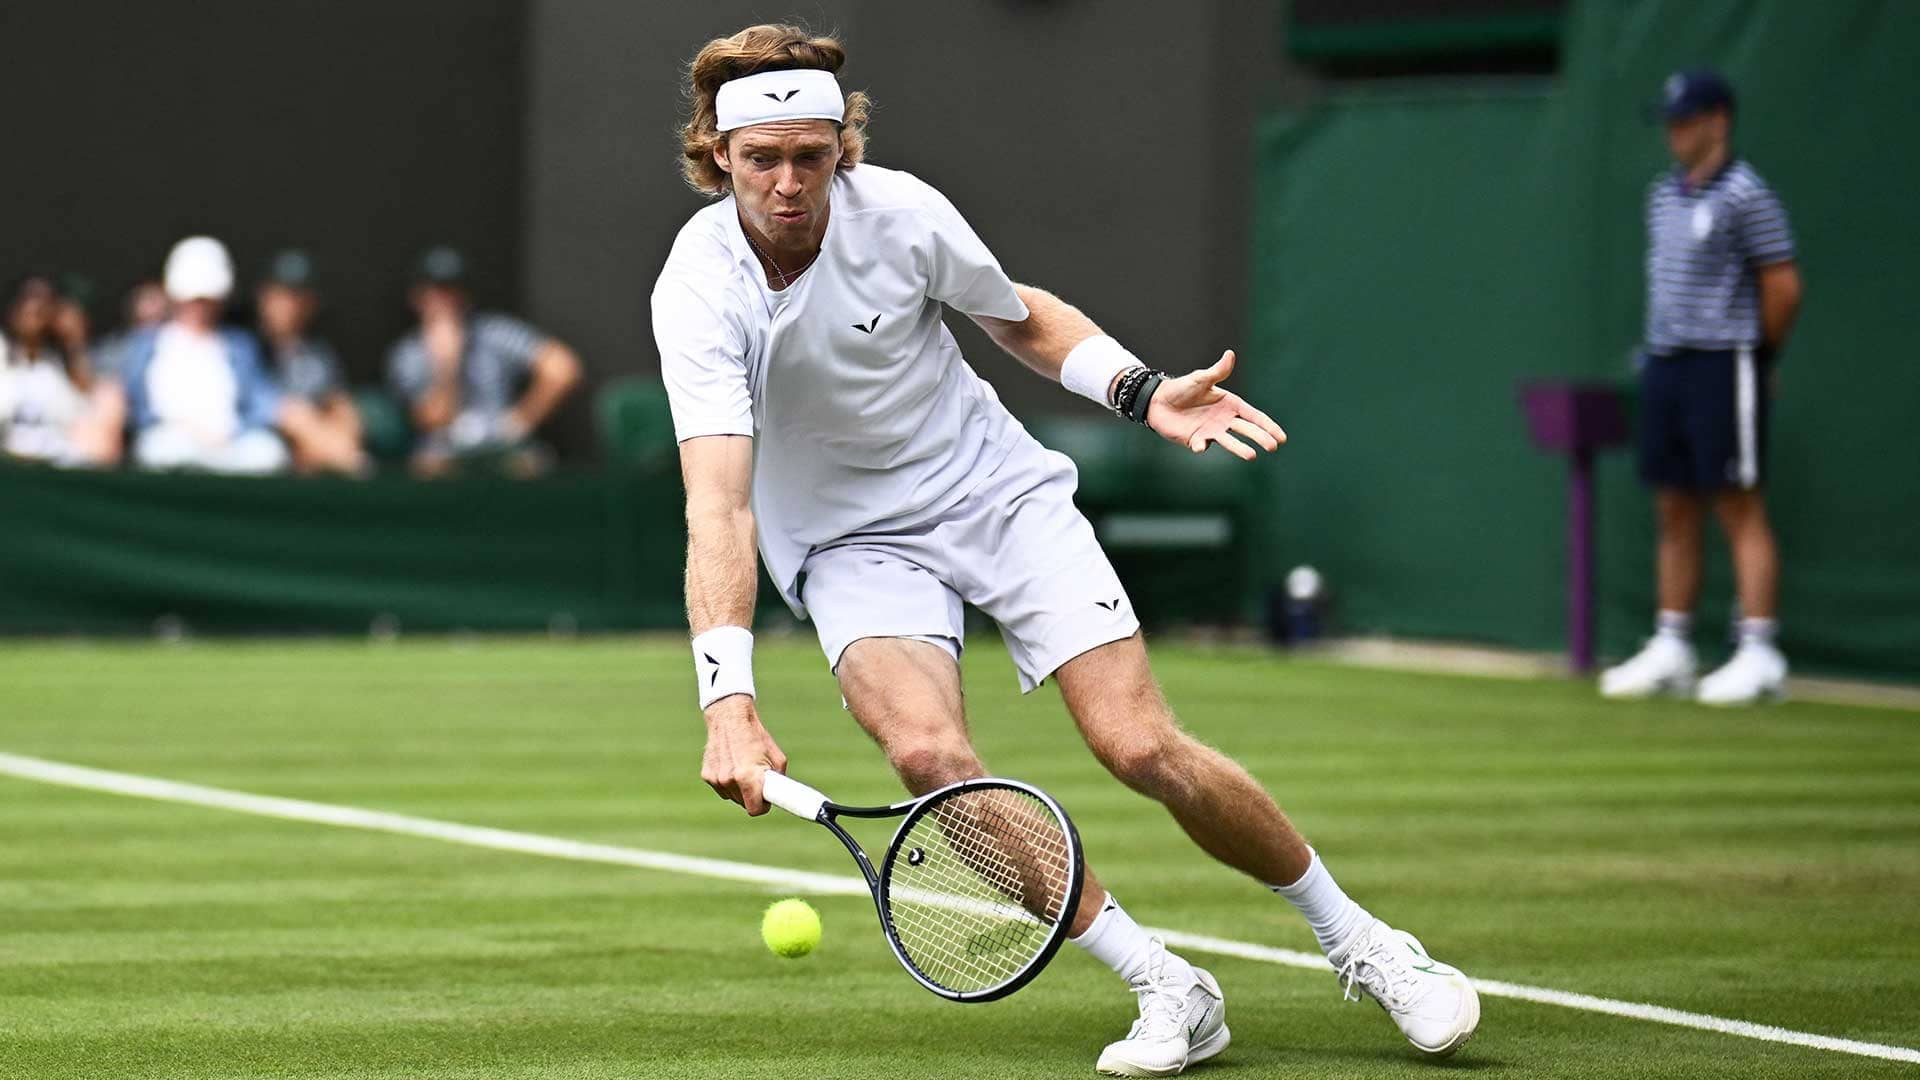 Andrey Rublev in action on Monday at Wimbledon.